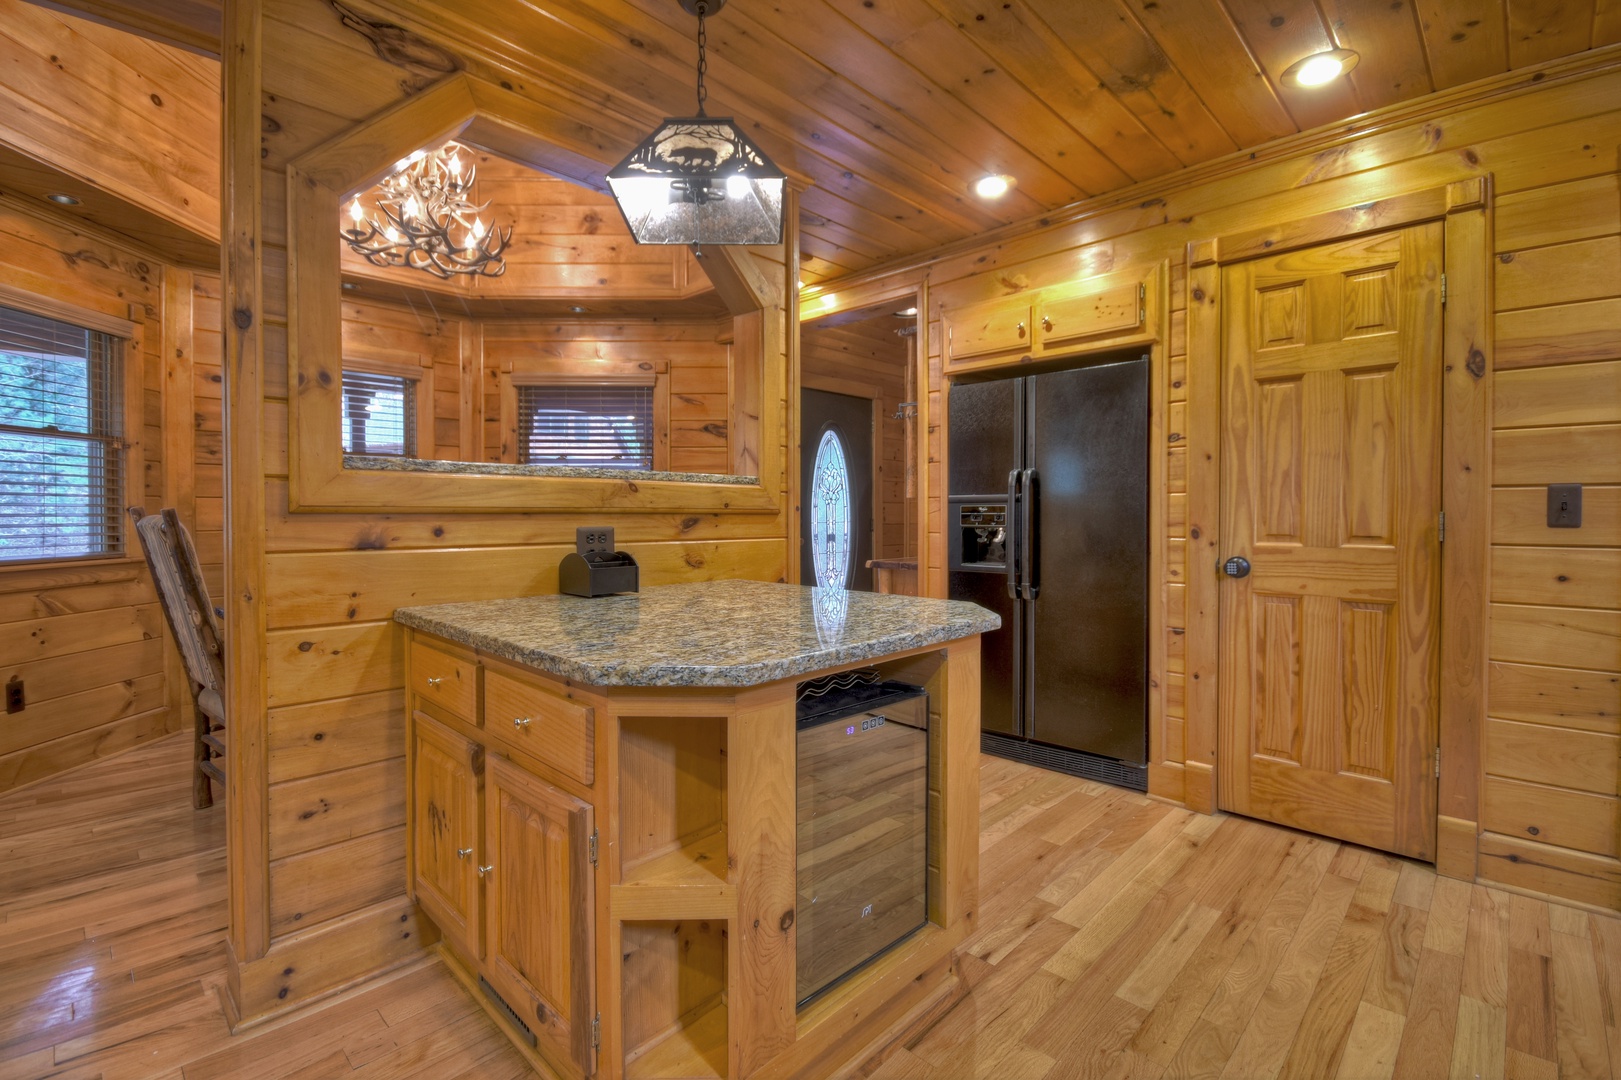 Deer Watch Lodge- Kitchen with full function appliances